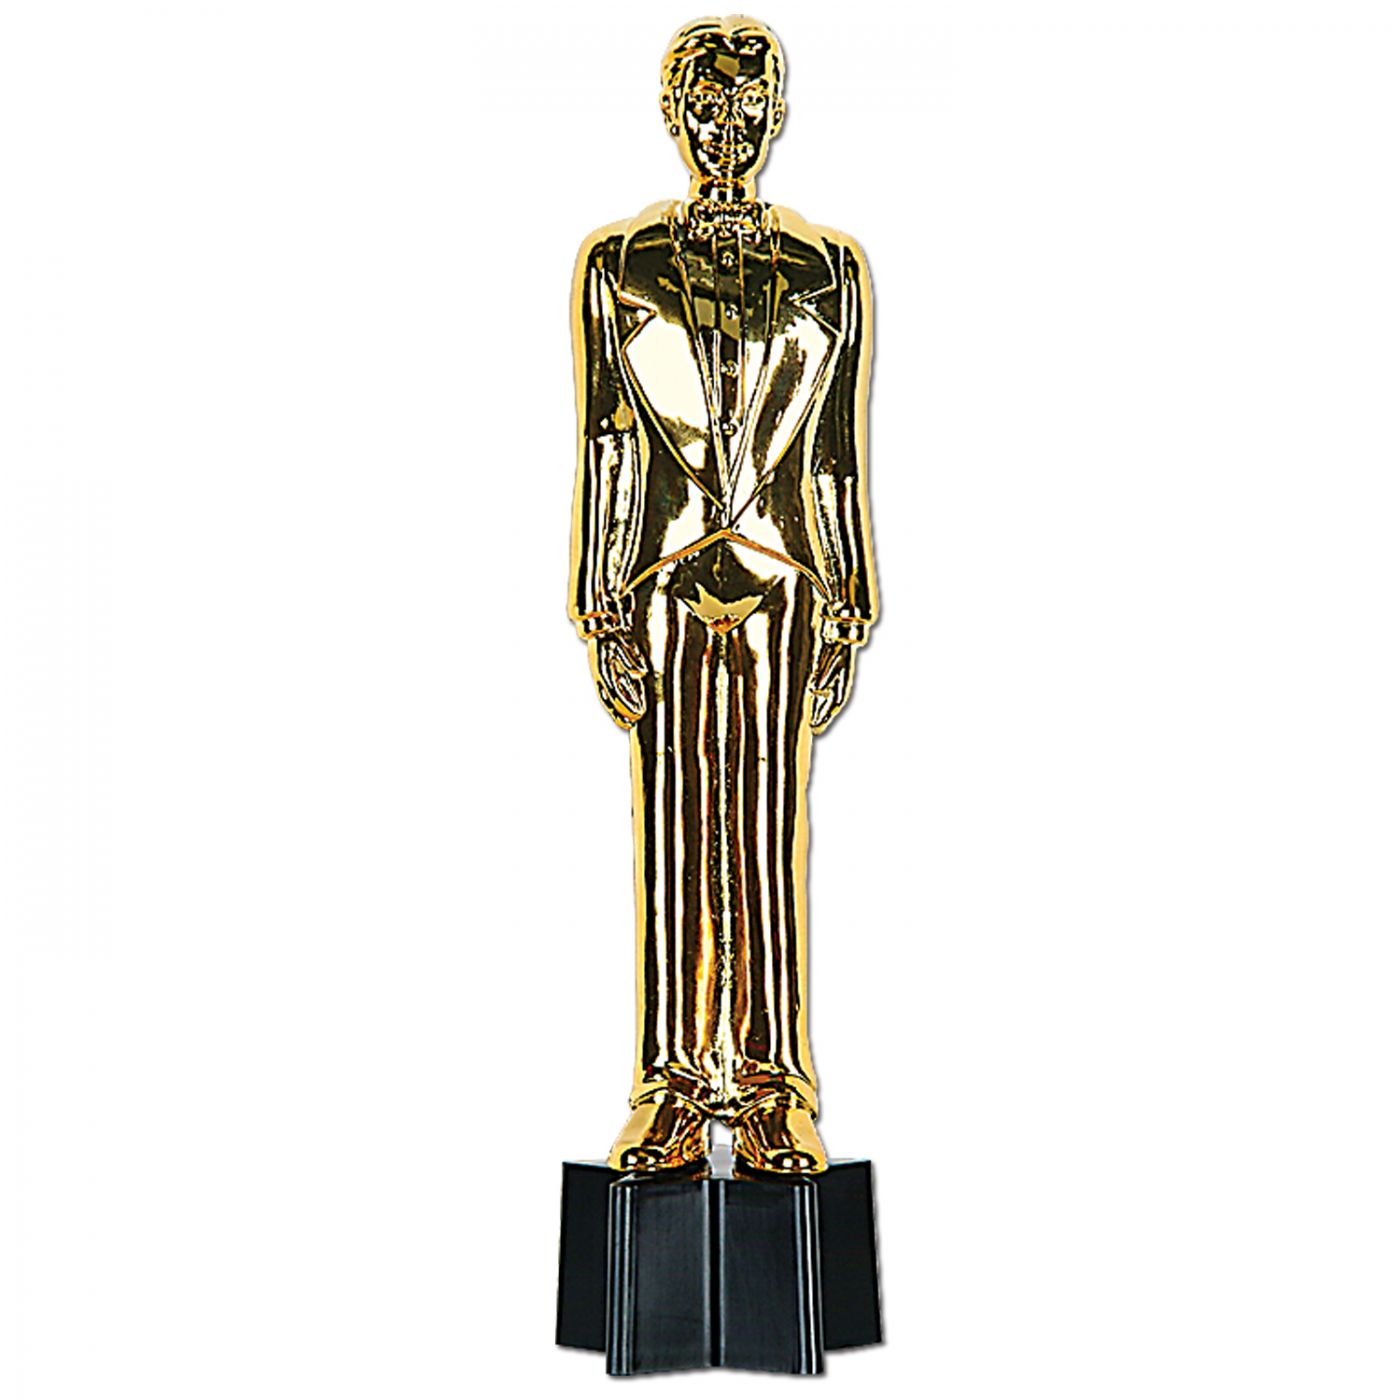 Image of Awards Night Male Statuette (6)